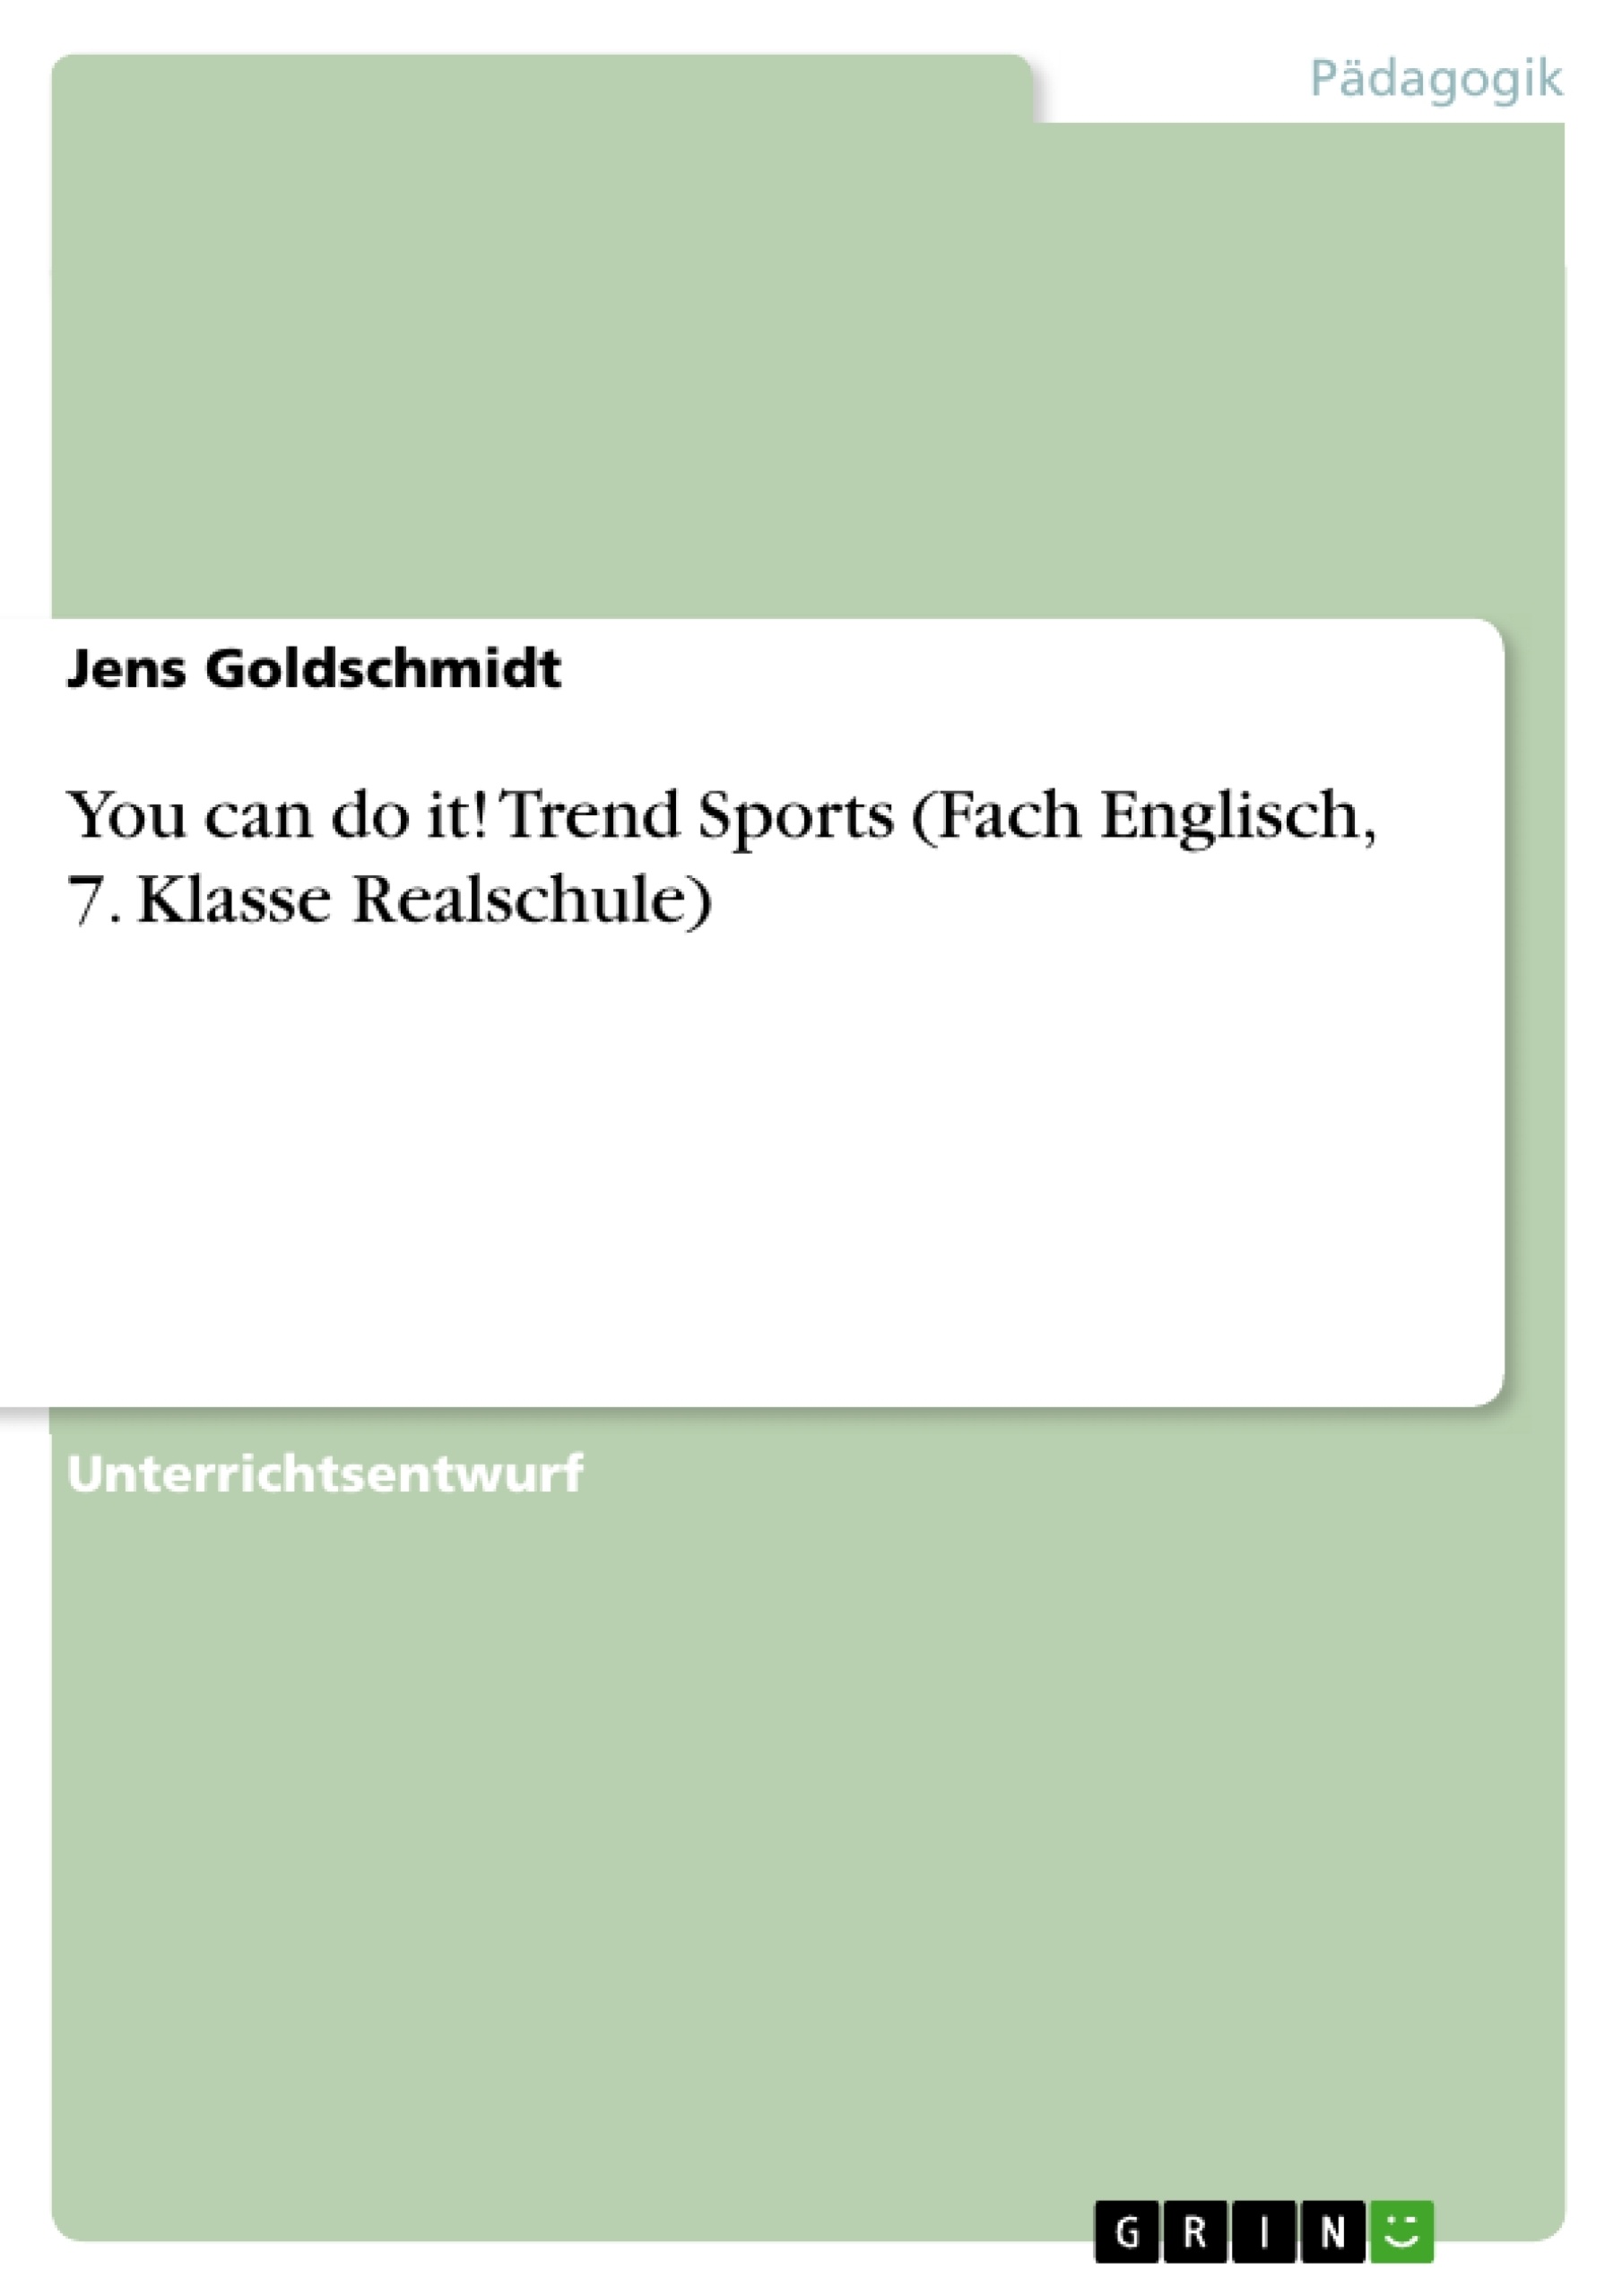 Title: You can do it! Trend Sports (Fach Englisch, 7. Klasse Realschule)